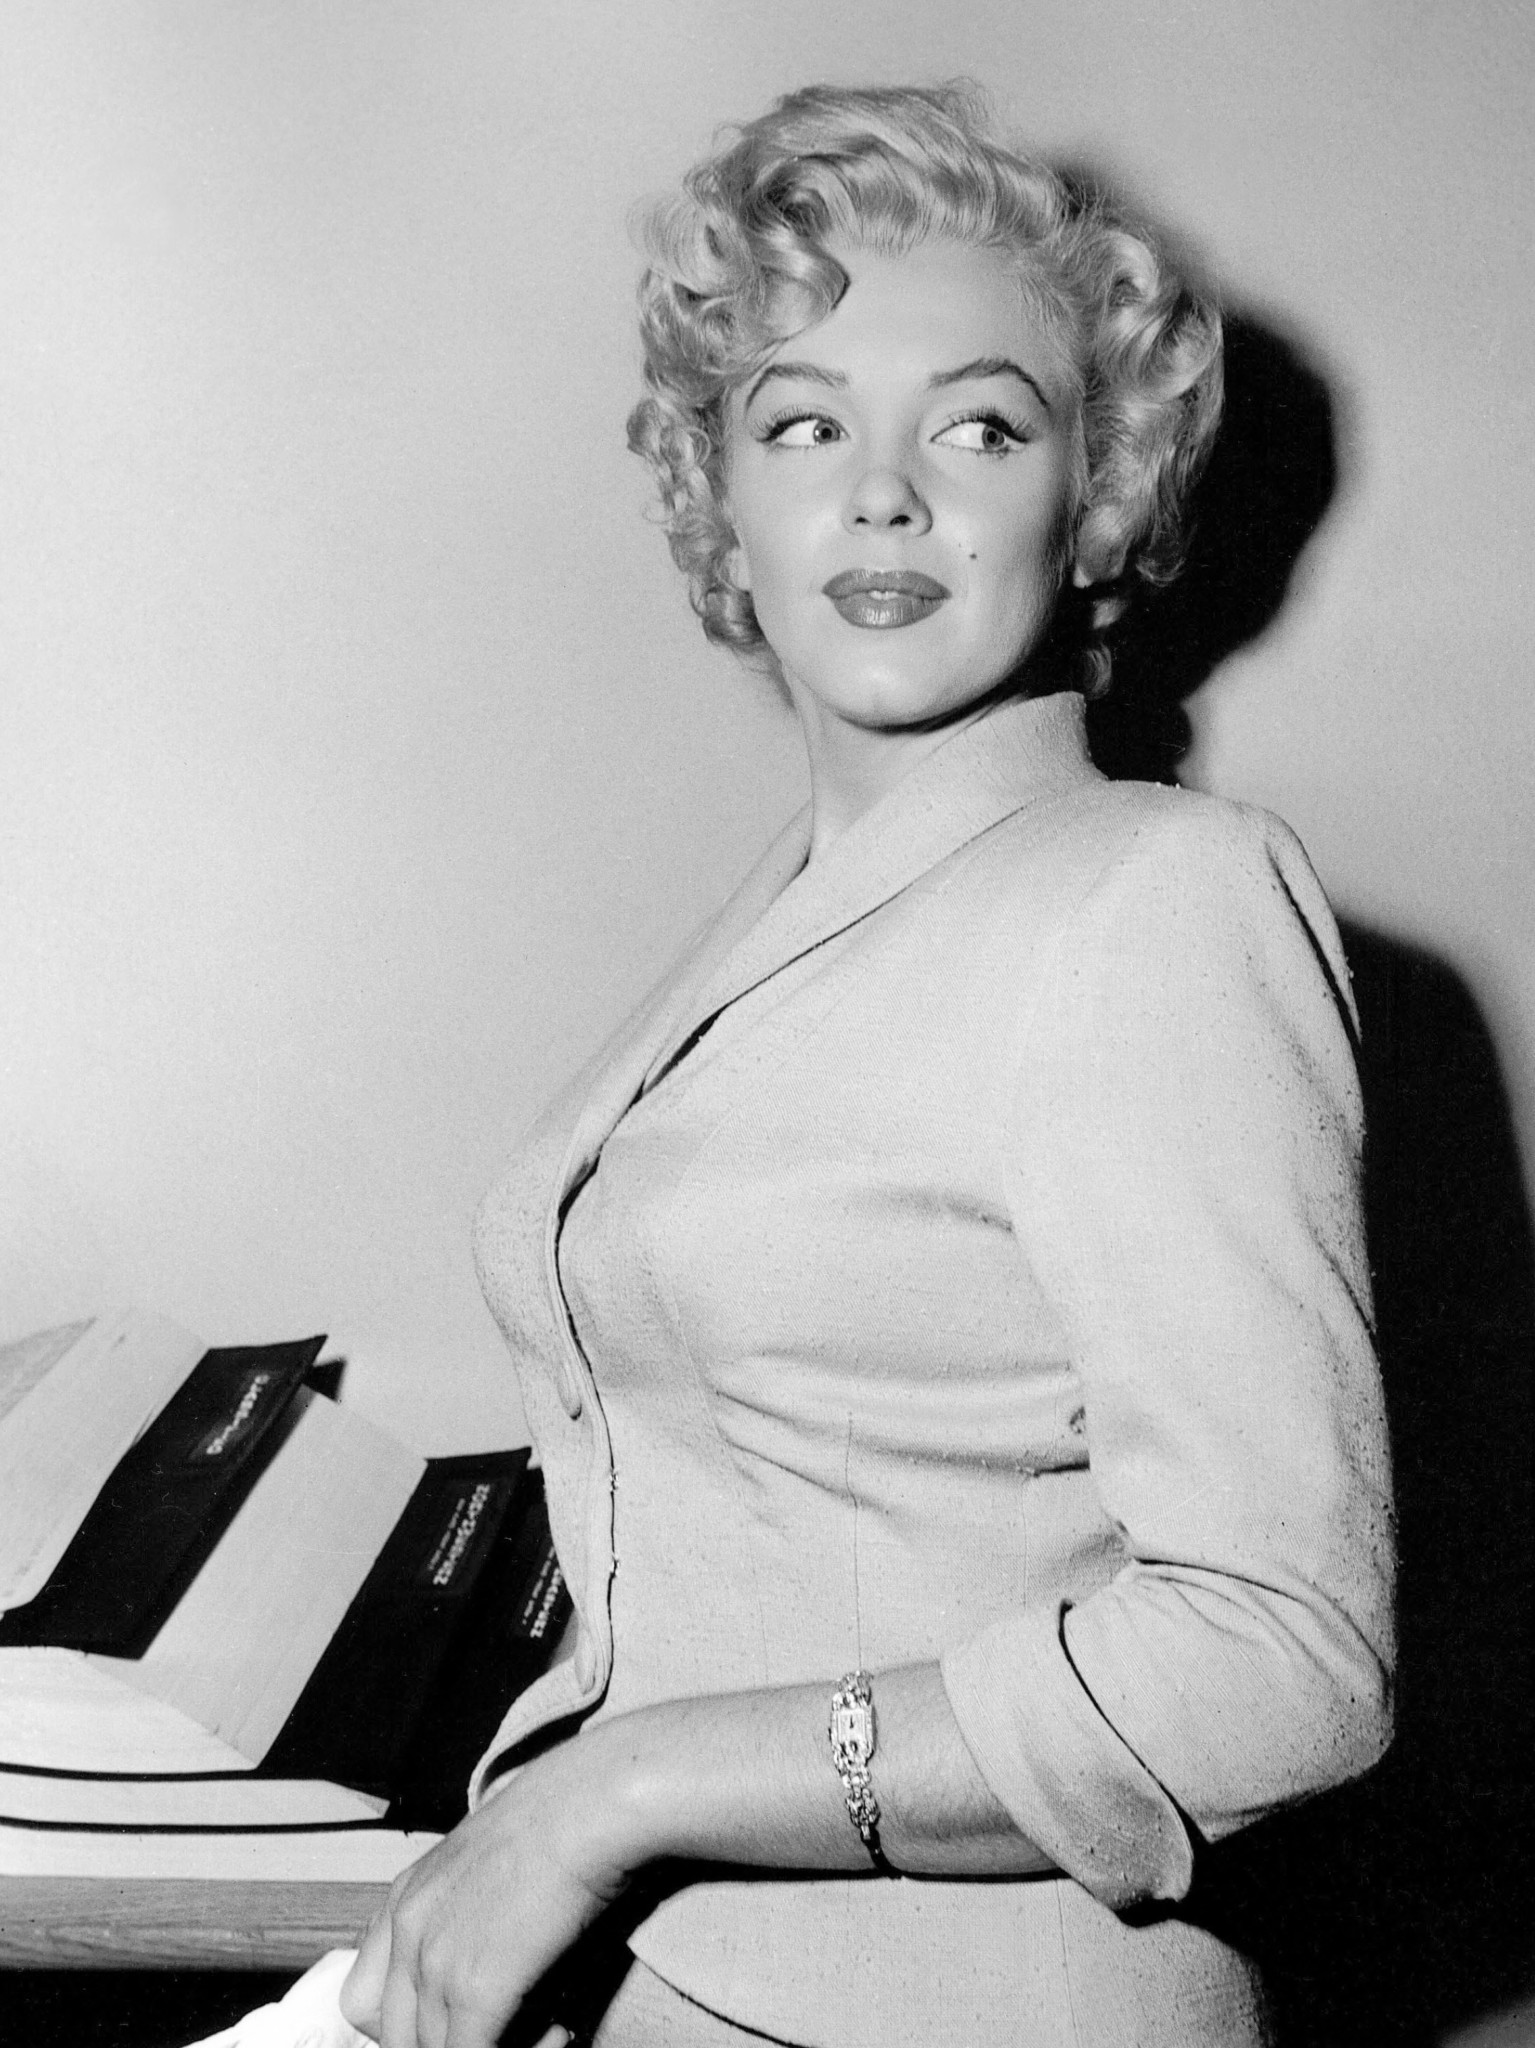 Blancpain Pays $225,000 To Buy Back Watch Owned By Marilyn Monroe